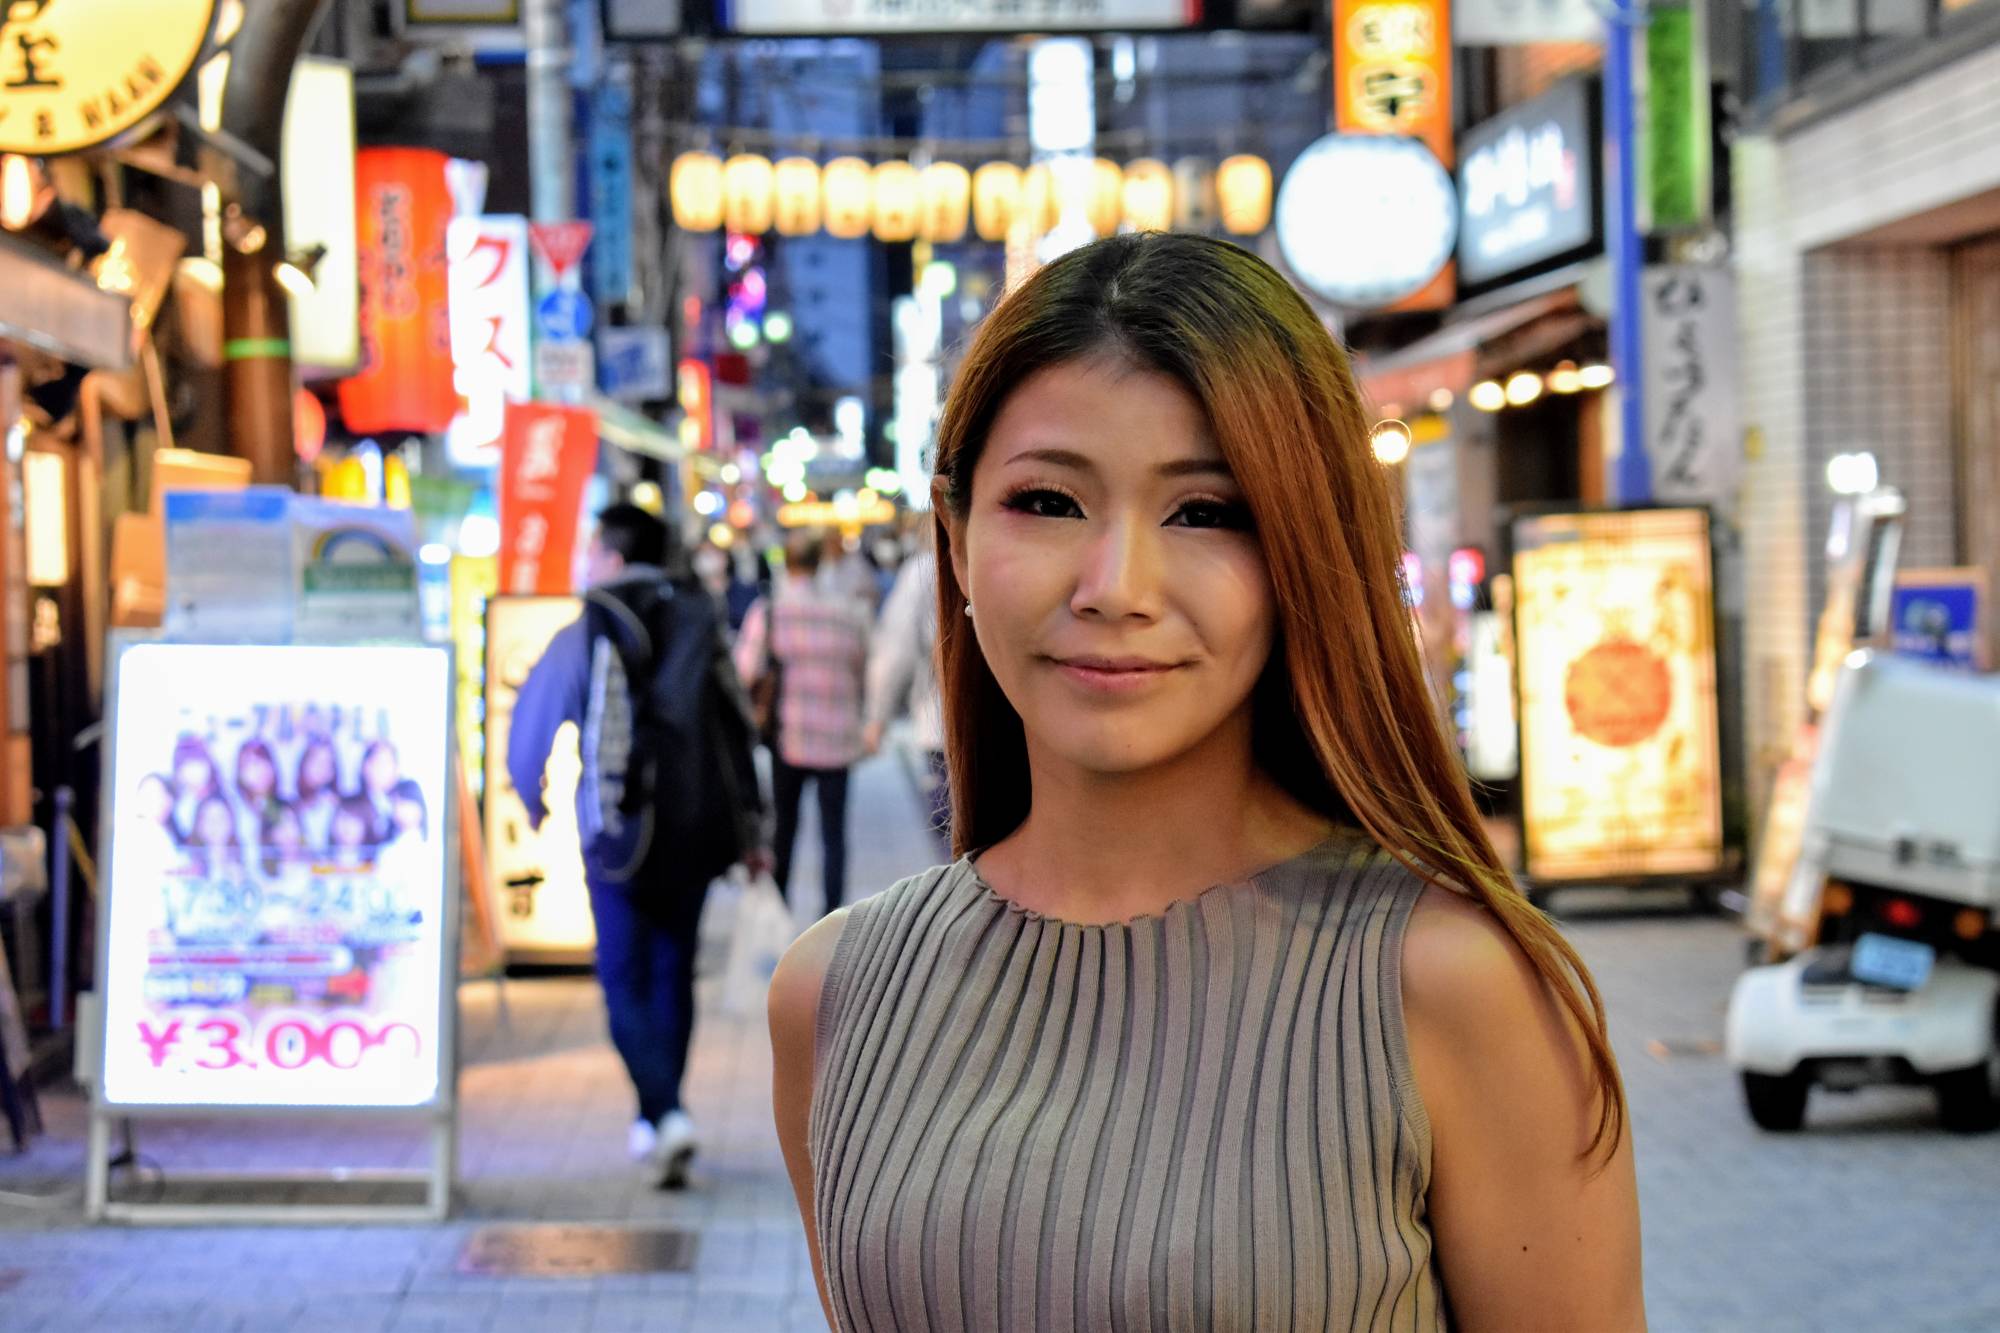 Shocking discrimination Japans sex industry cries foul over exclusion from government image